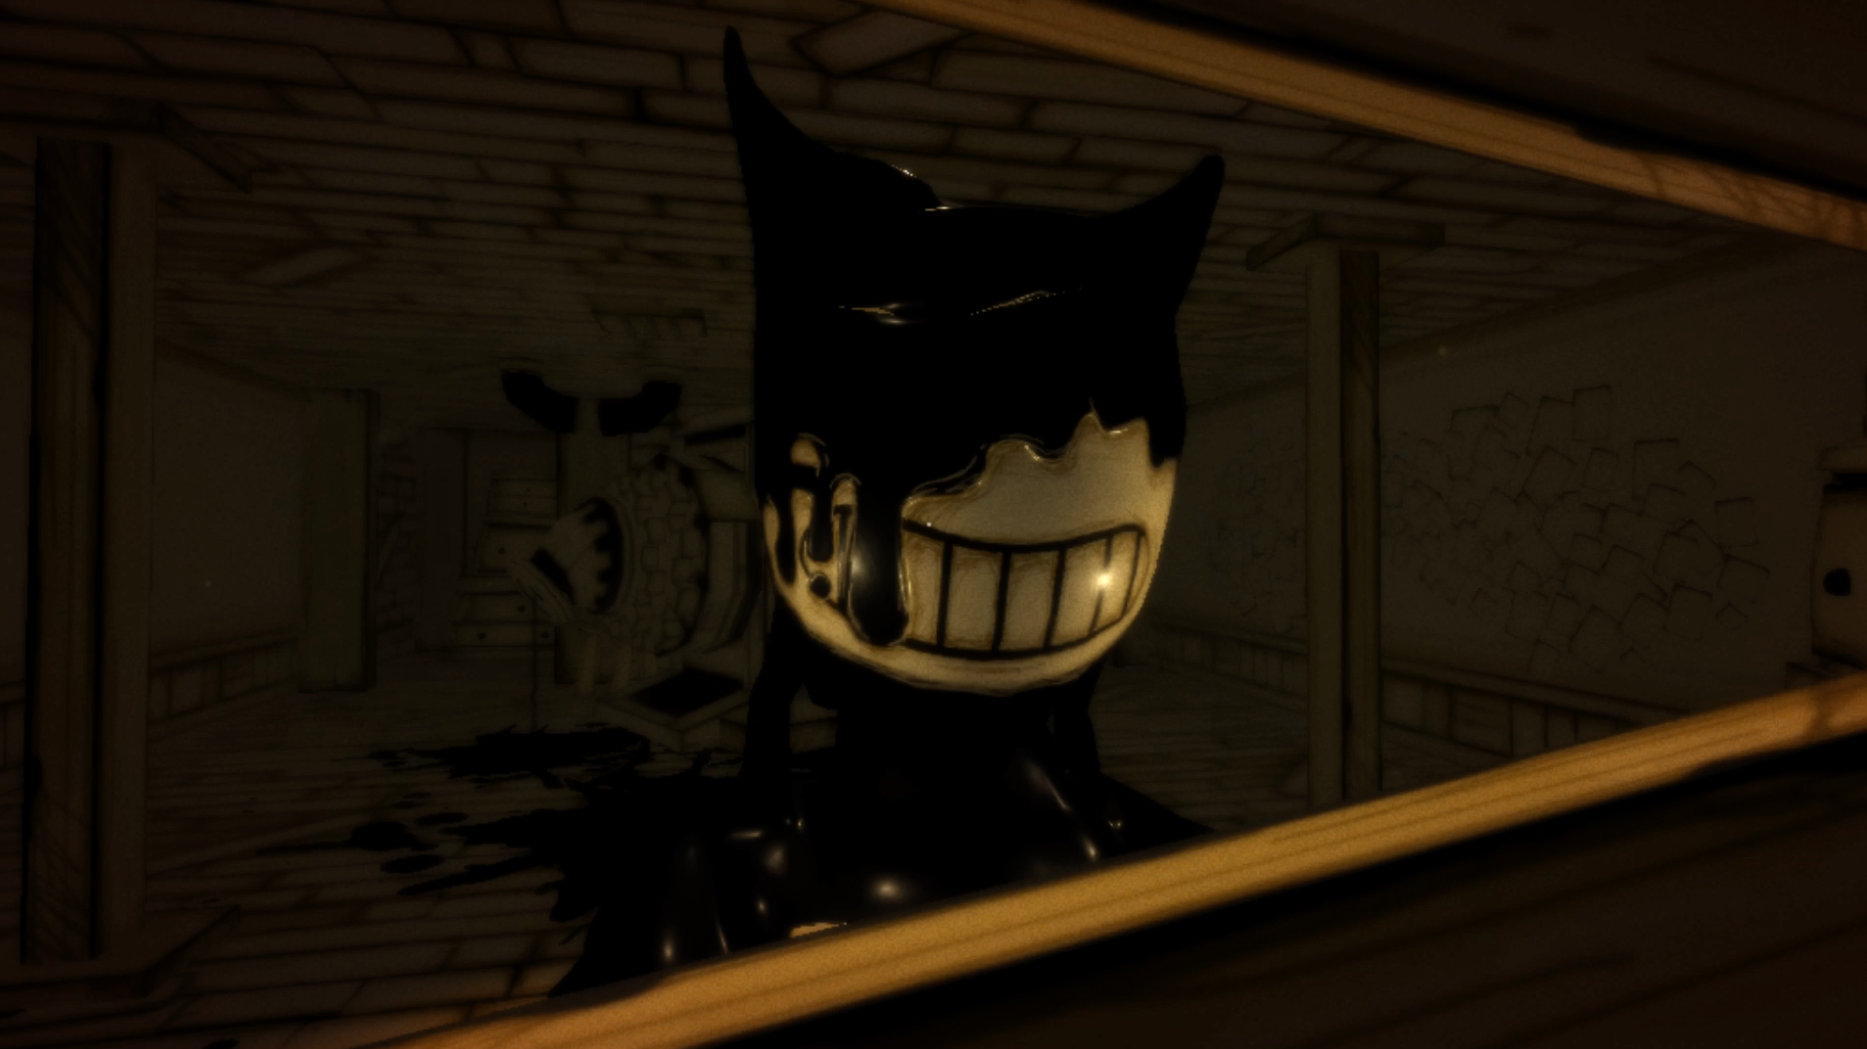 Download & Bendy and the Ink Machine on PC & Mac (Emulator)